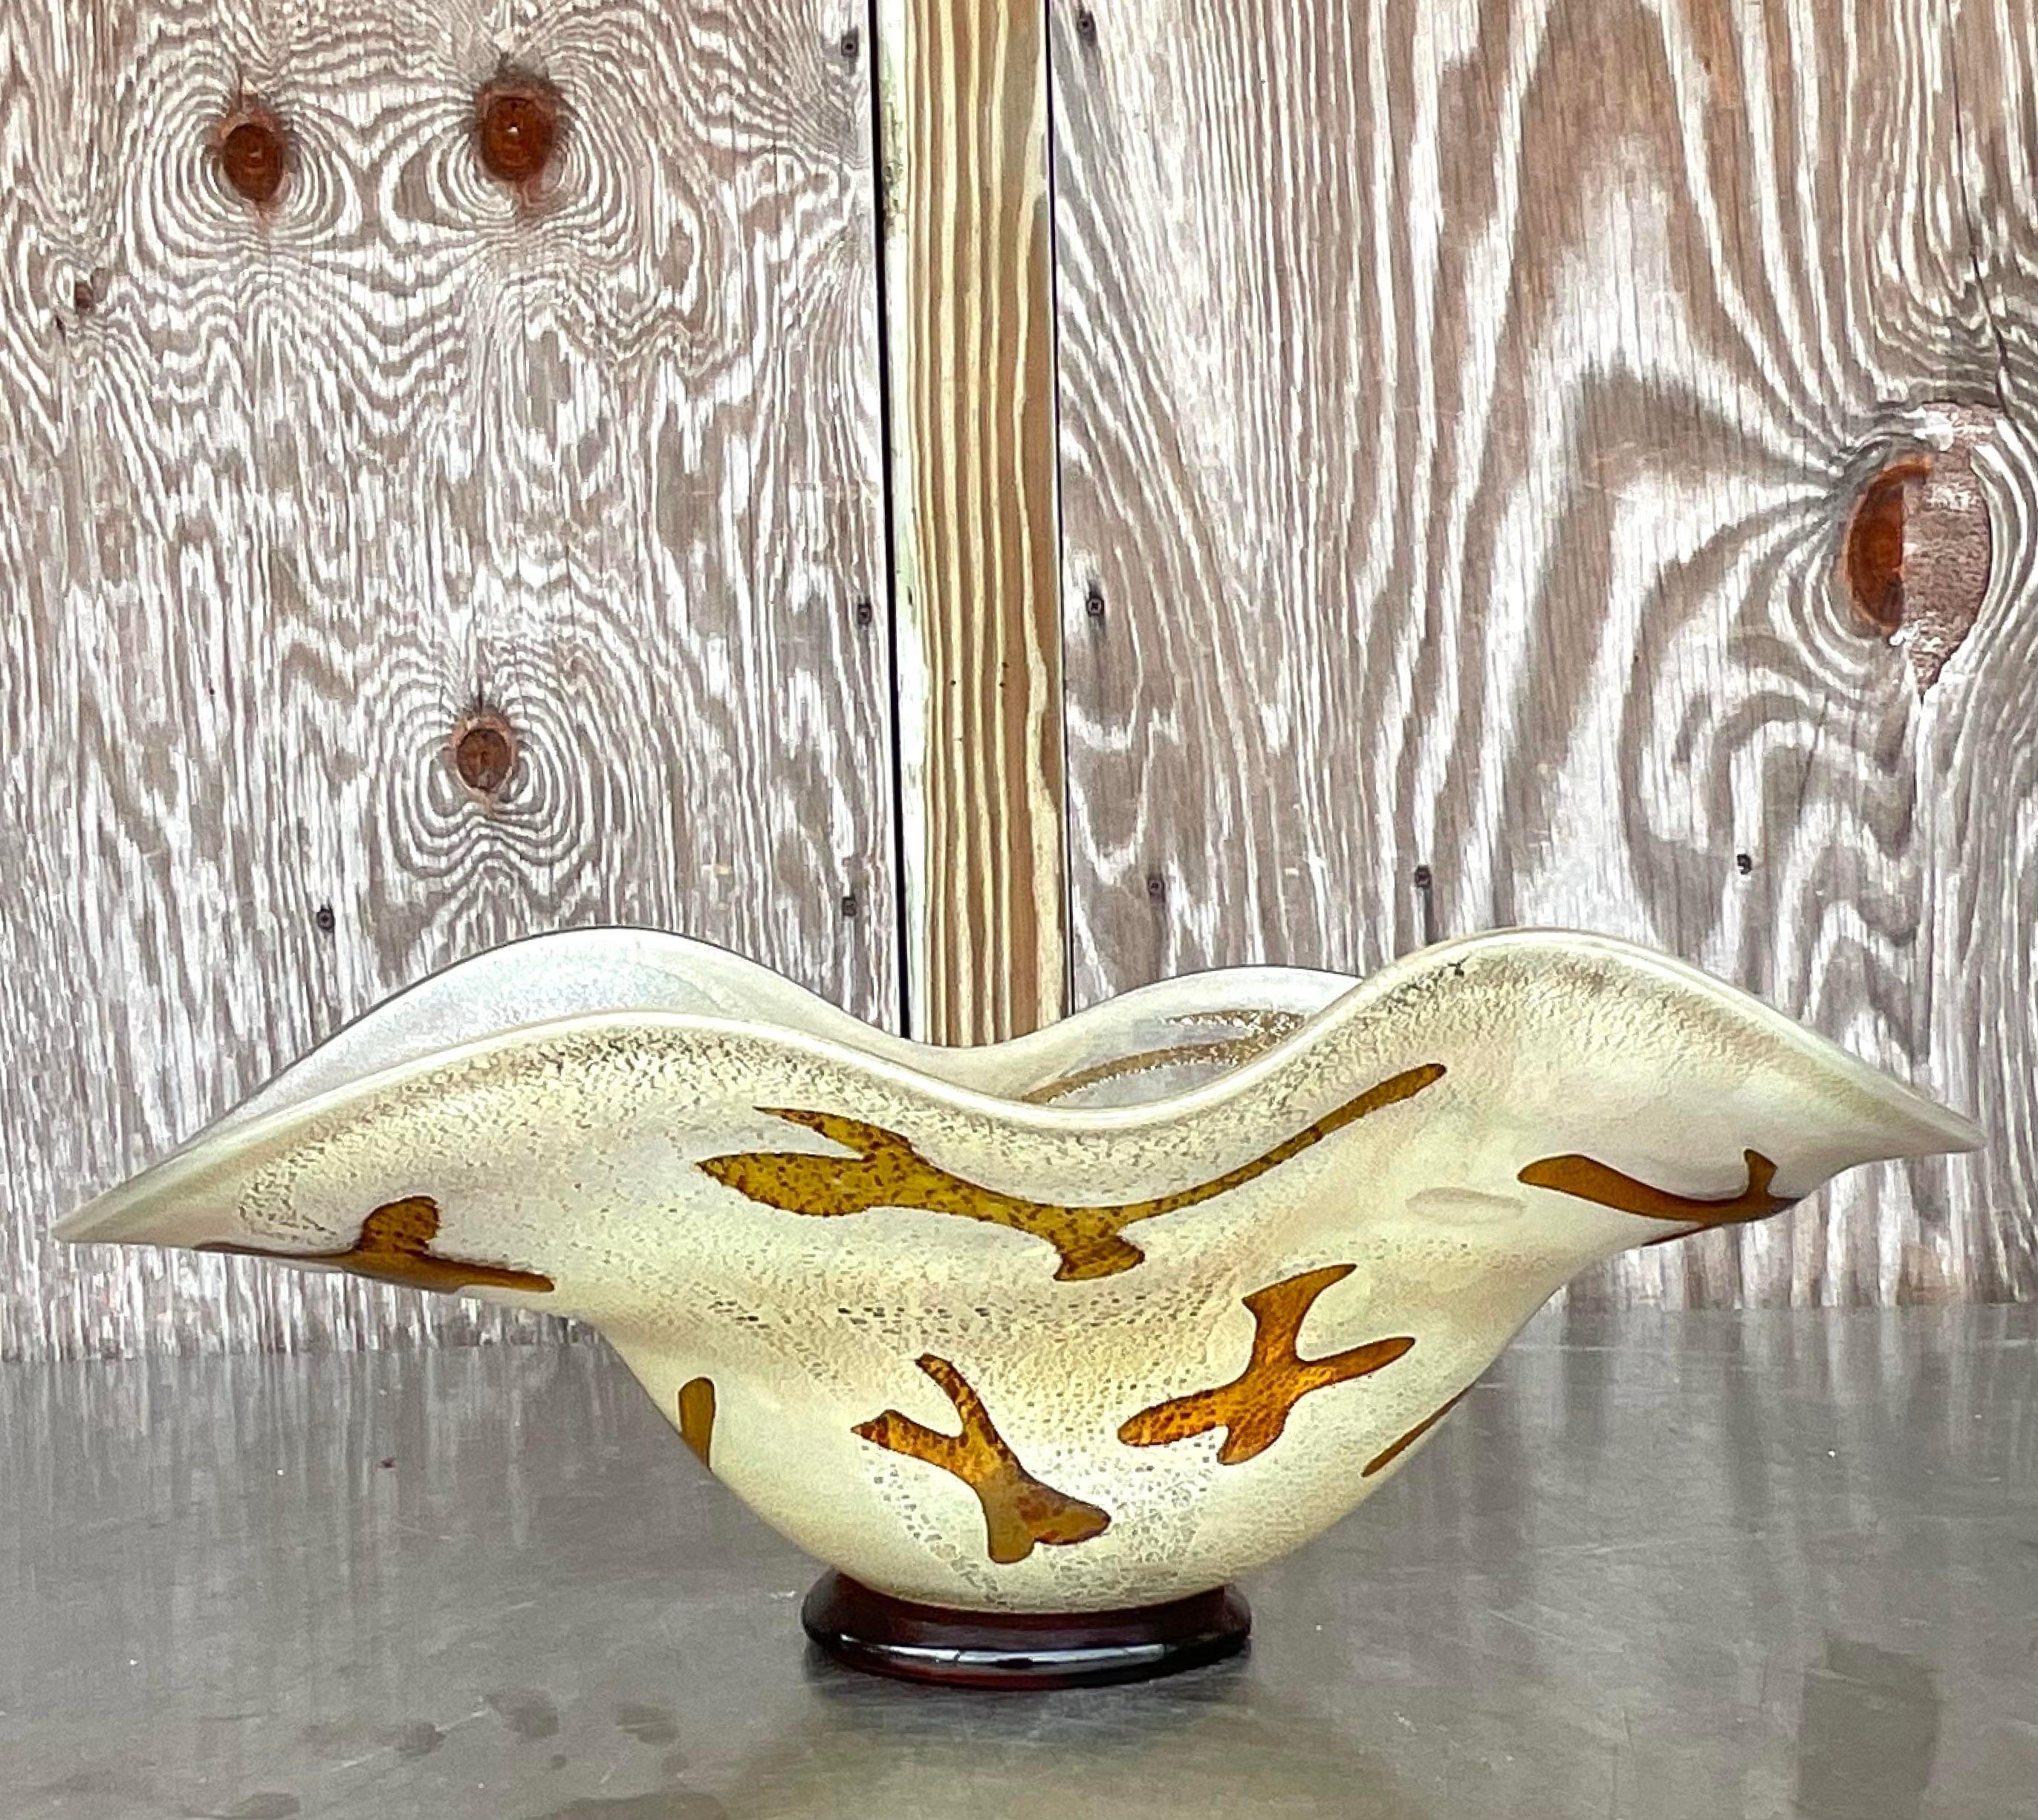 Add artistic flair to your home with this Vintage Boho Signed Art Glass Bowl. Featuring unique, handcrafted details and vibrant colors, this bowl embodies bohemian elegance. The artist's signature and expert American craftsmanship make it a stunning